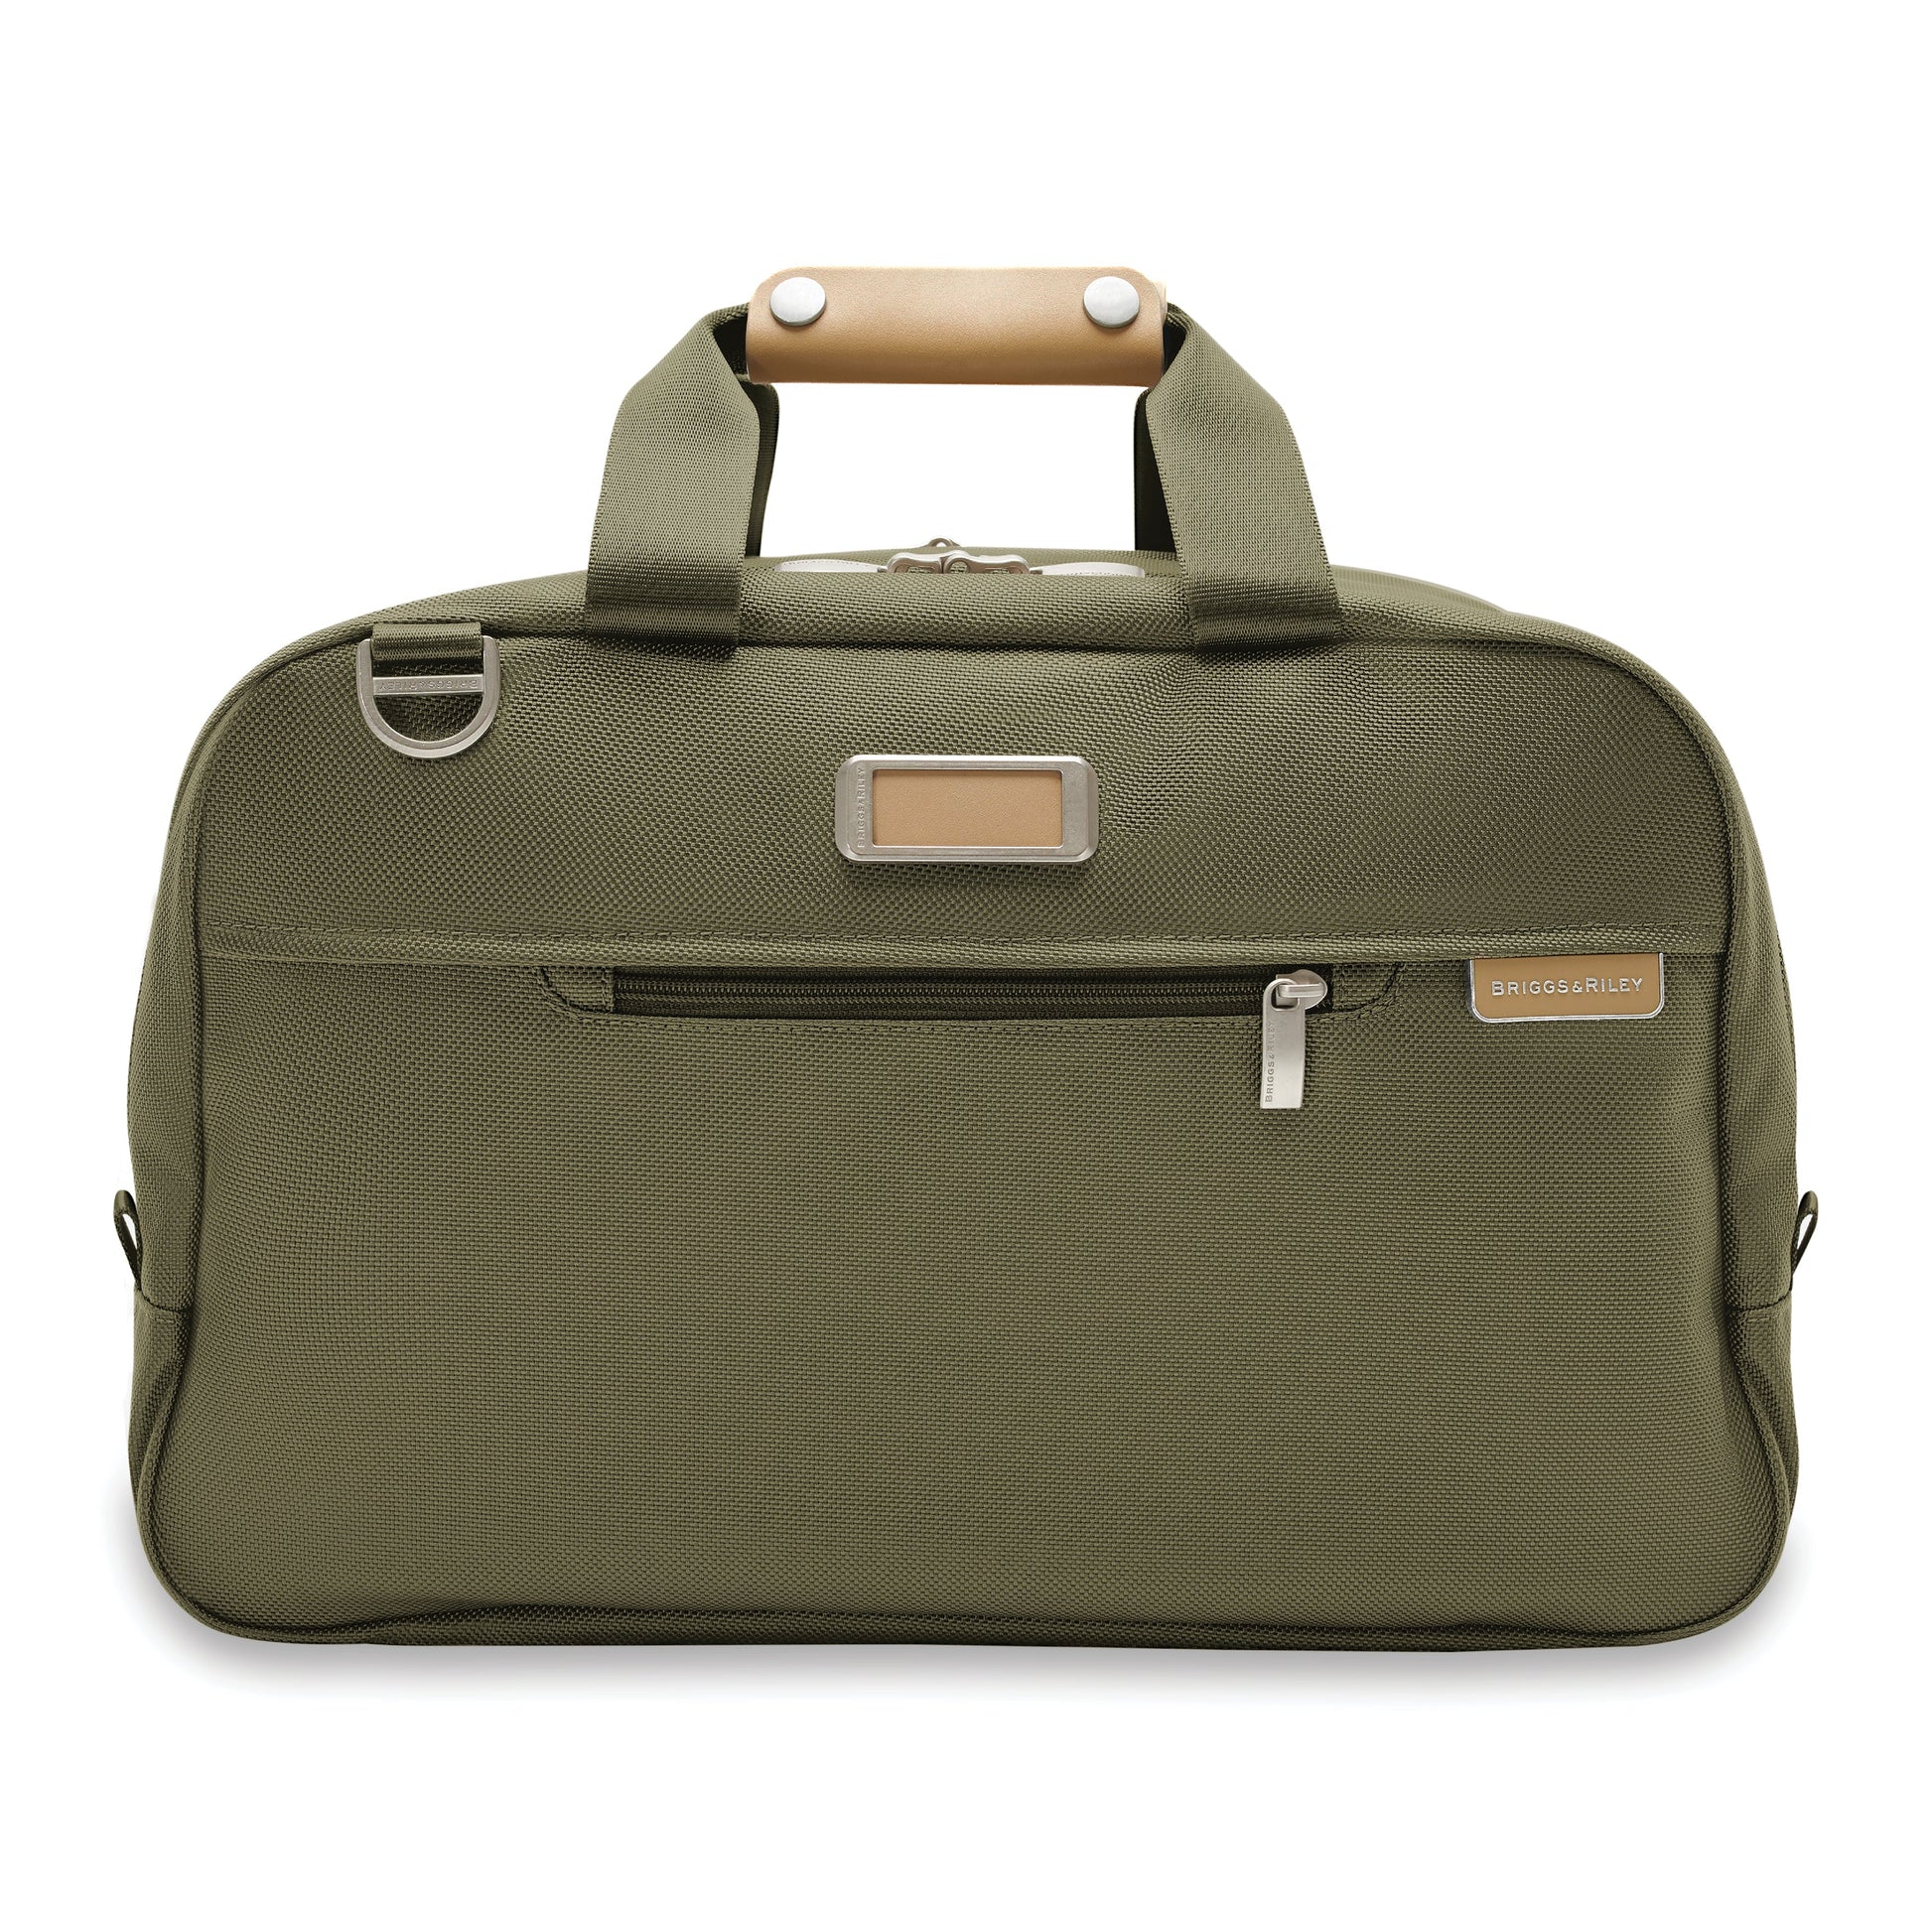 Briggs & Riley NEW Baseline Executive Travel Duffle - Olive